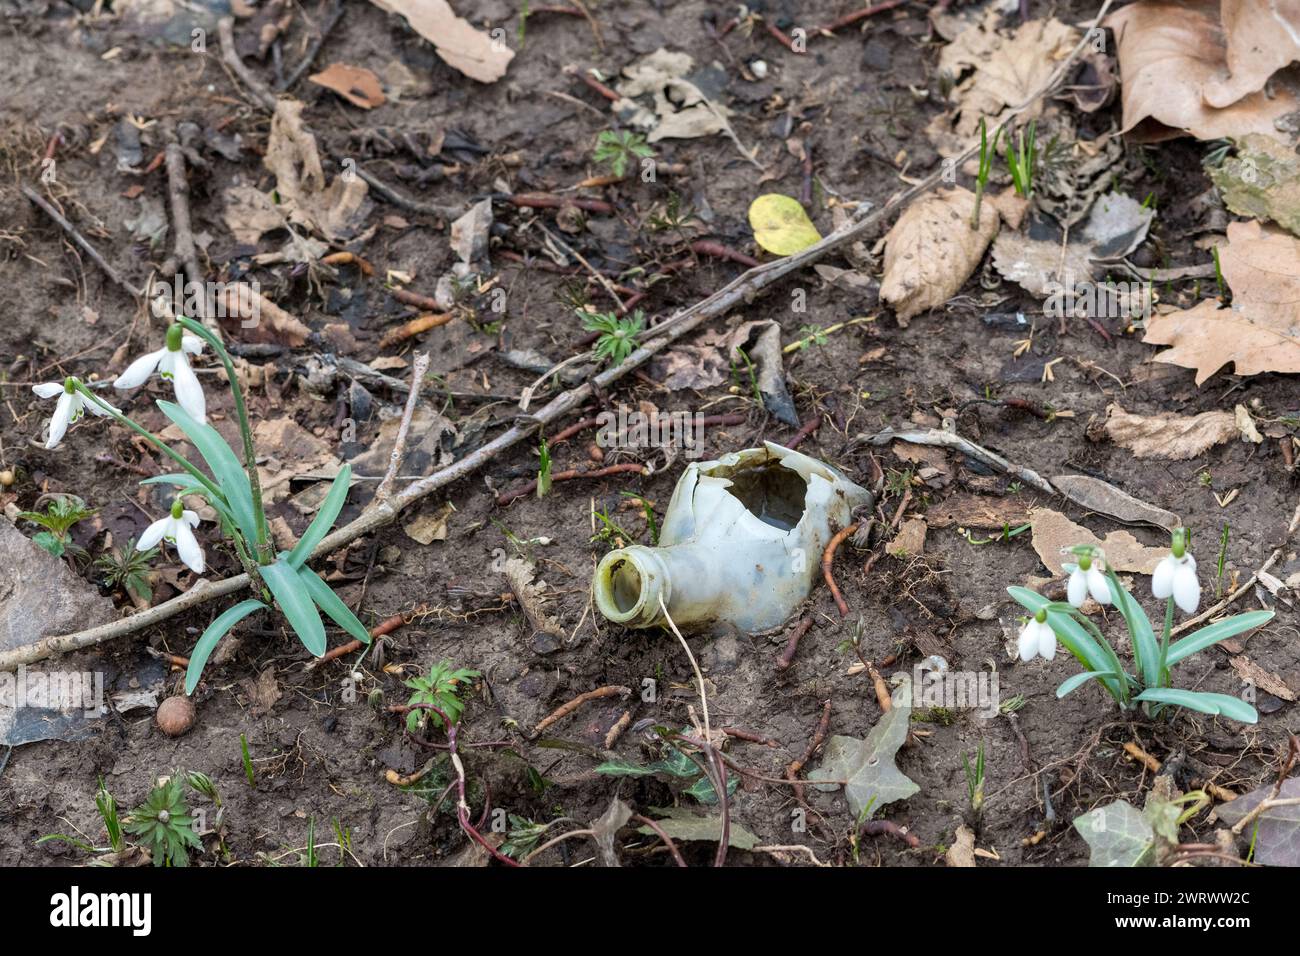 Top view of a portion of a plastic bottle hidden underground and abandoned in a forest. Polluting waste that is ruining our planet. Plastic materials. Stock Photo